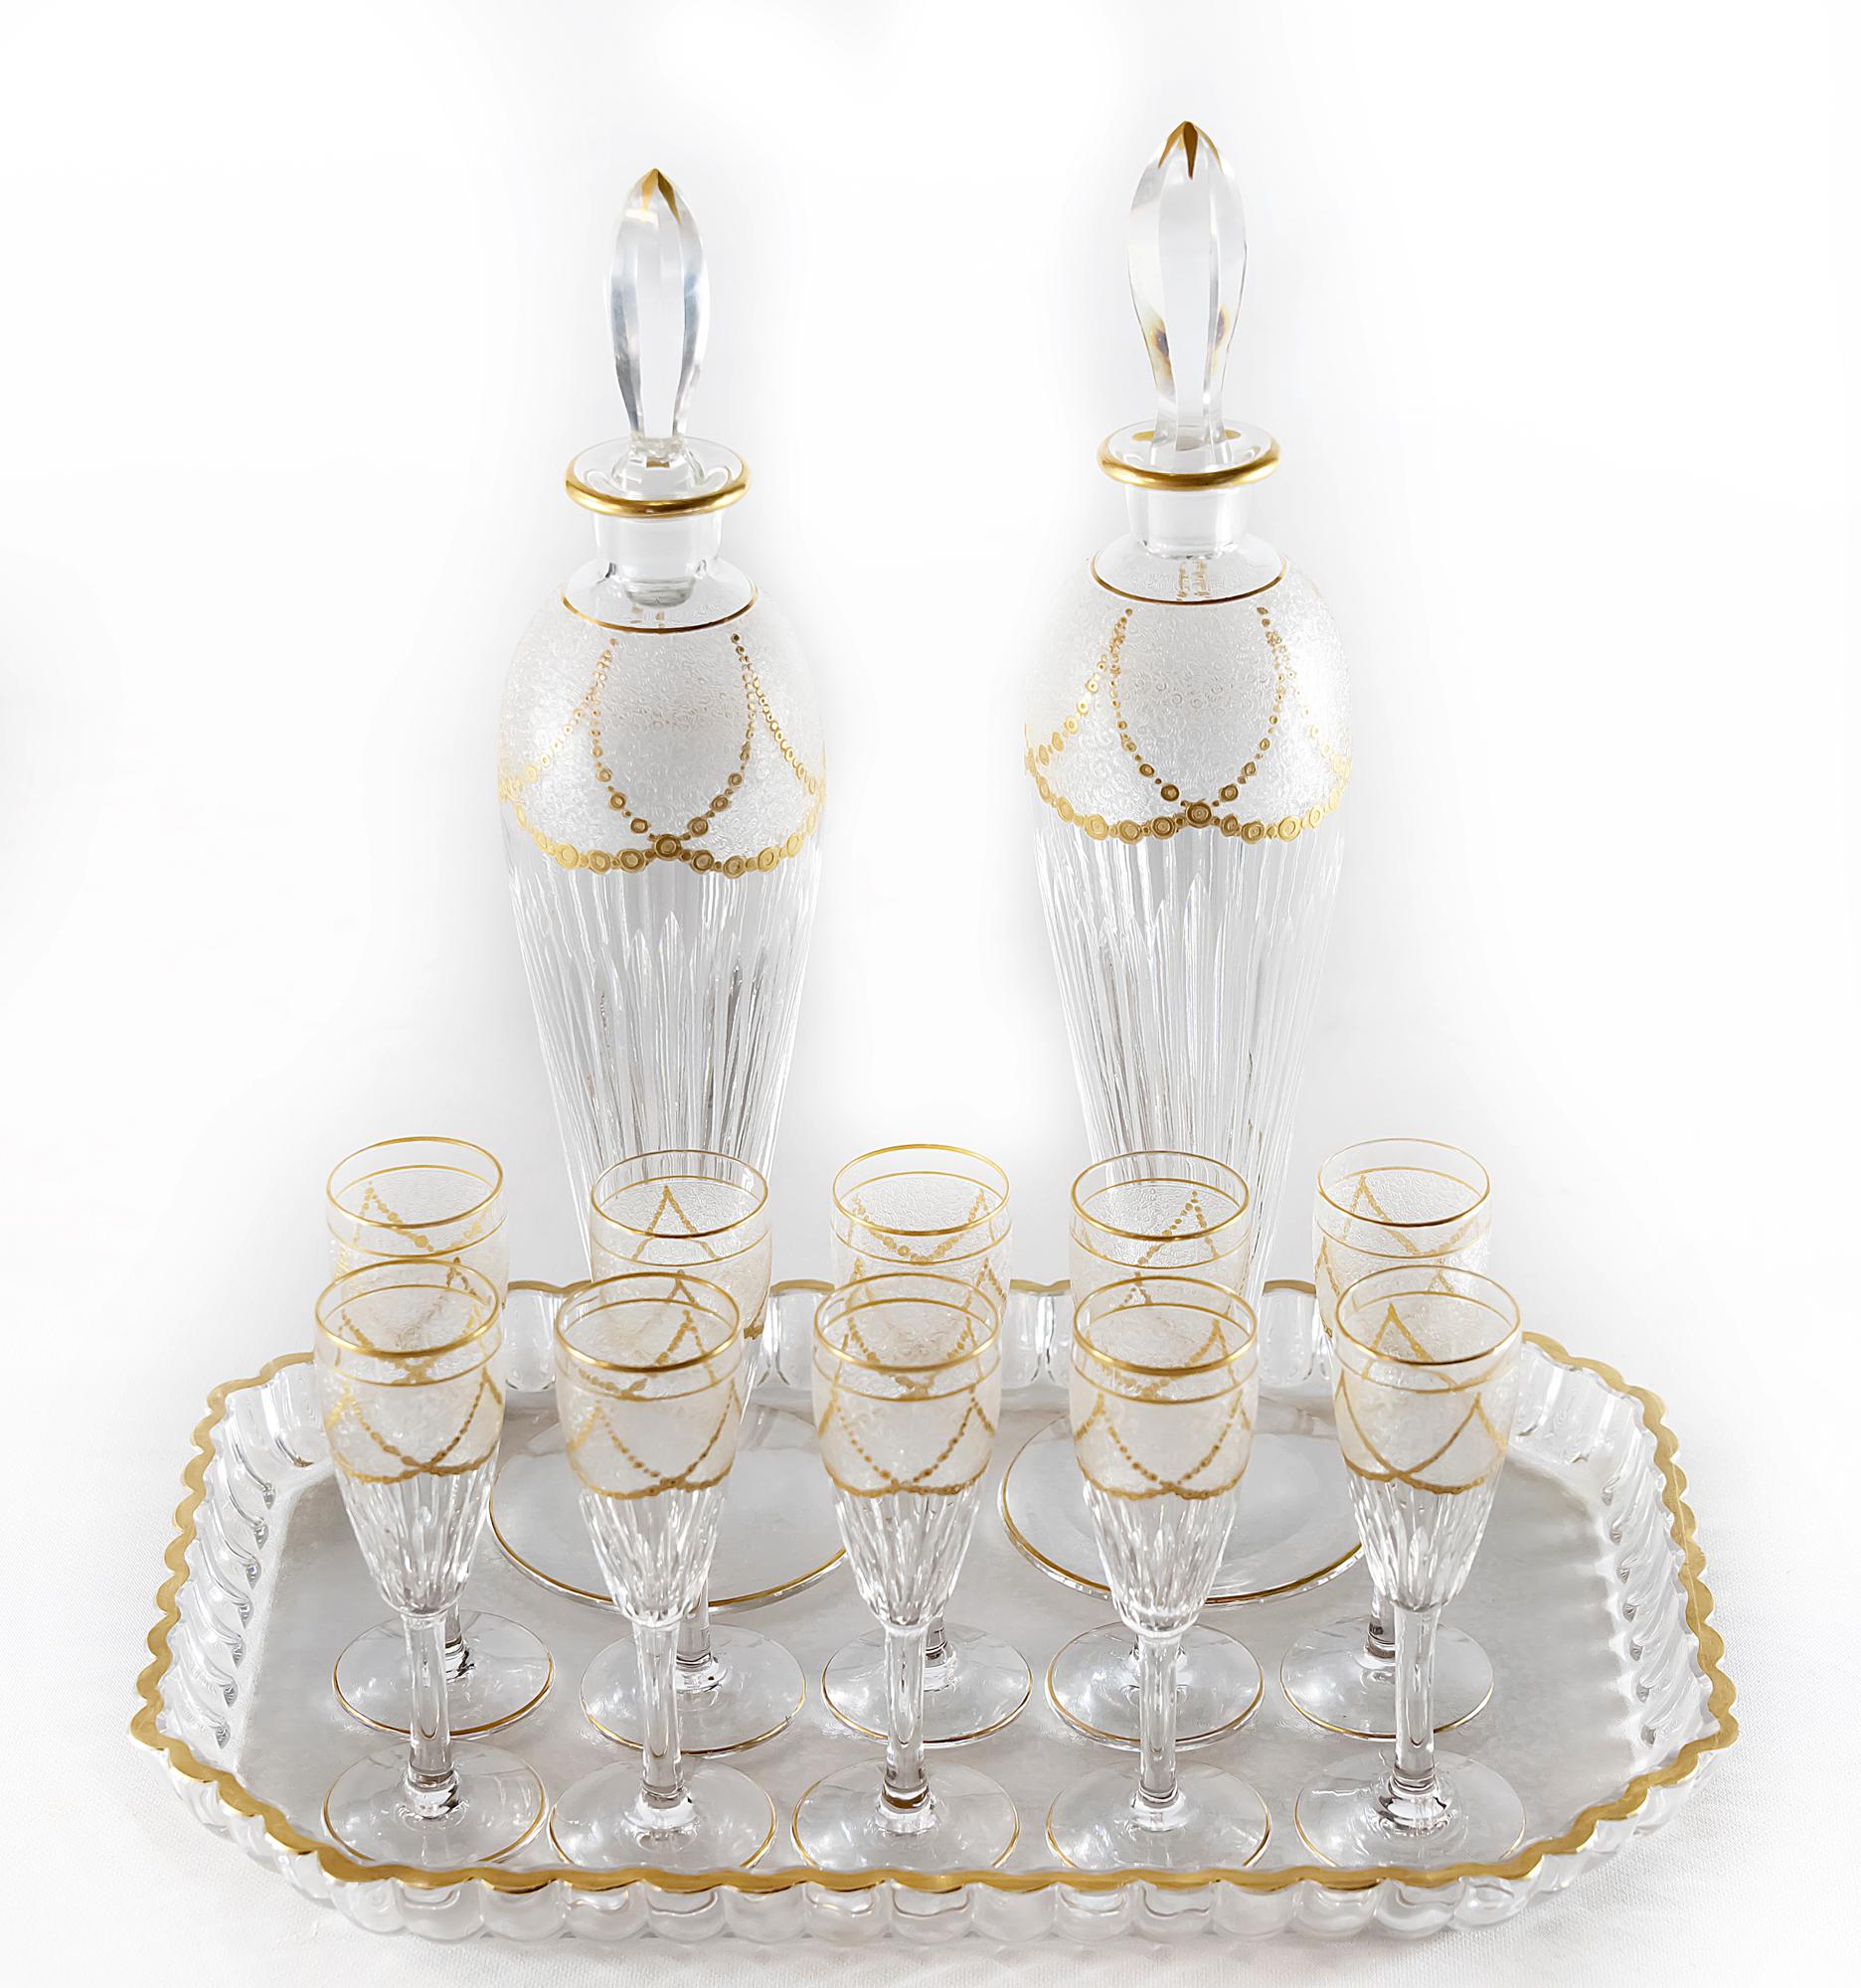 Antique French Saint Louis cut and frosted crystal liqueur set finely decorated with gilded ornaments, that includes 8 pieces of goblets, 2 pieces of decanters and 1 piece of tray.
Model 283, described in the catalogue from 1930.
Very good antique